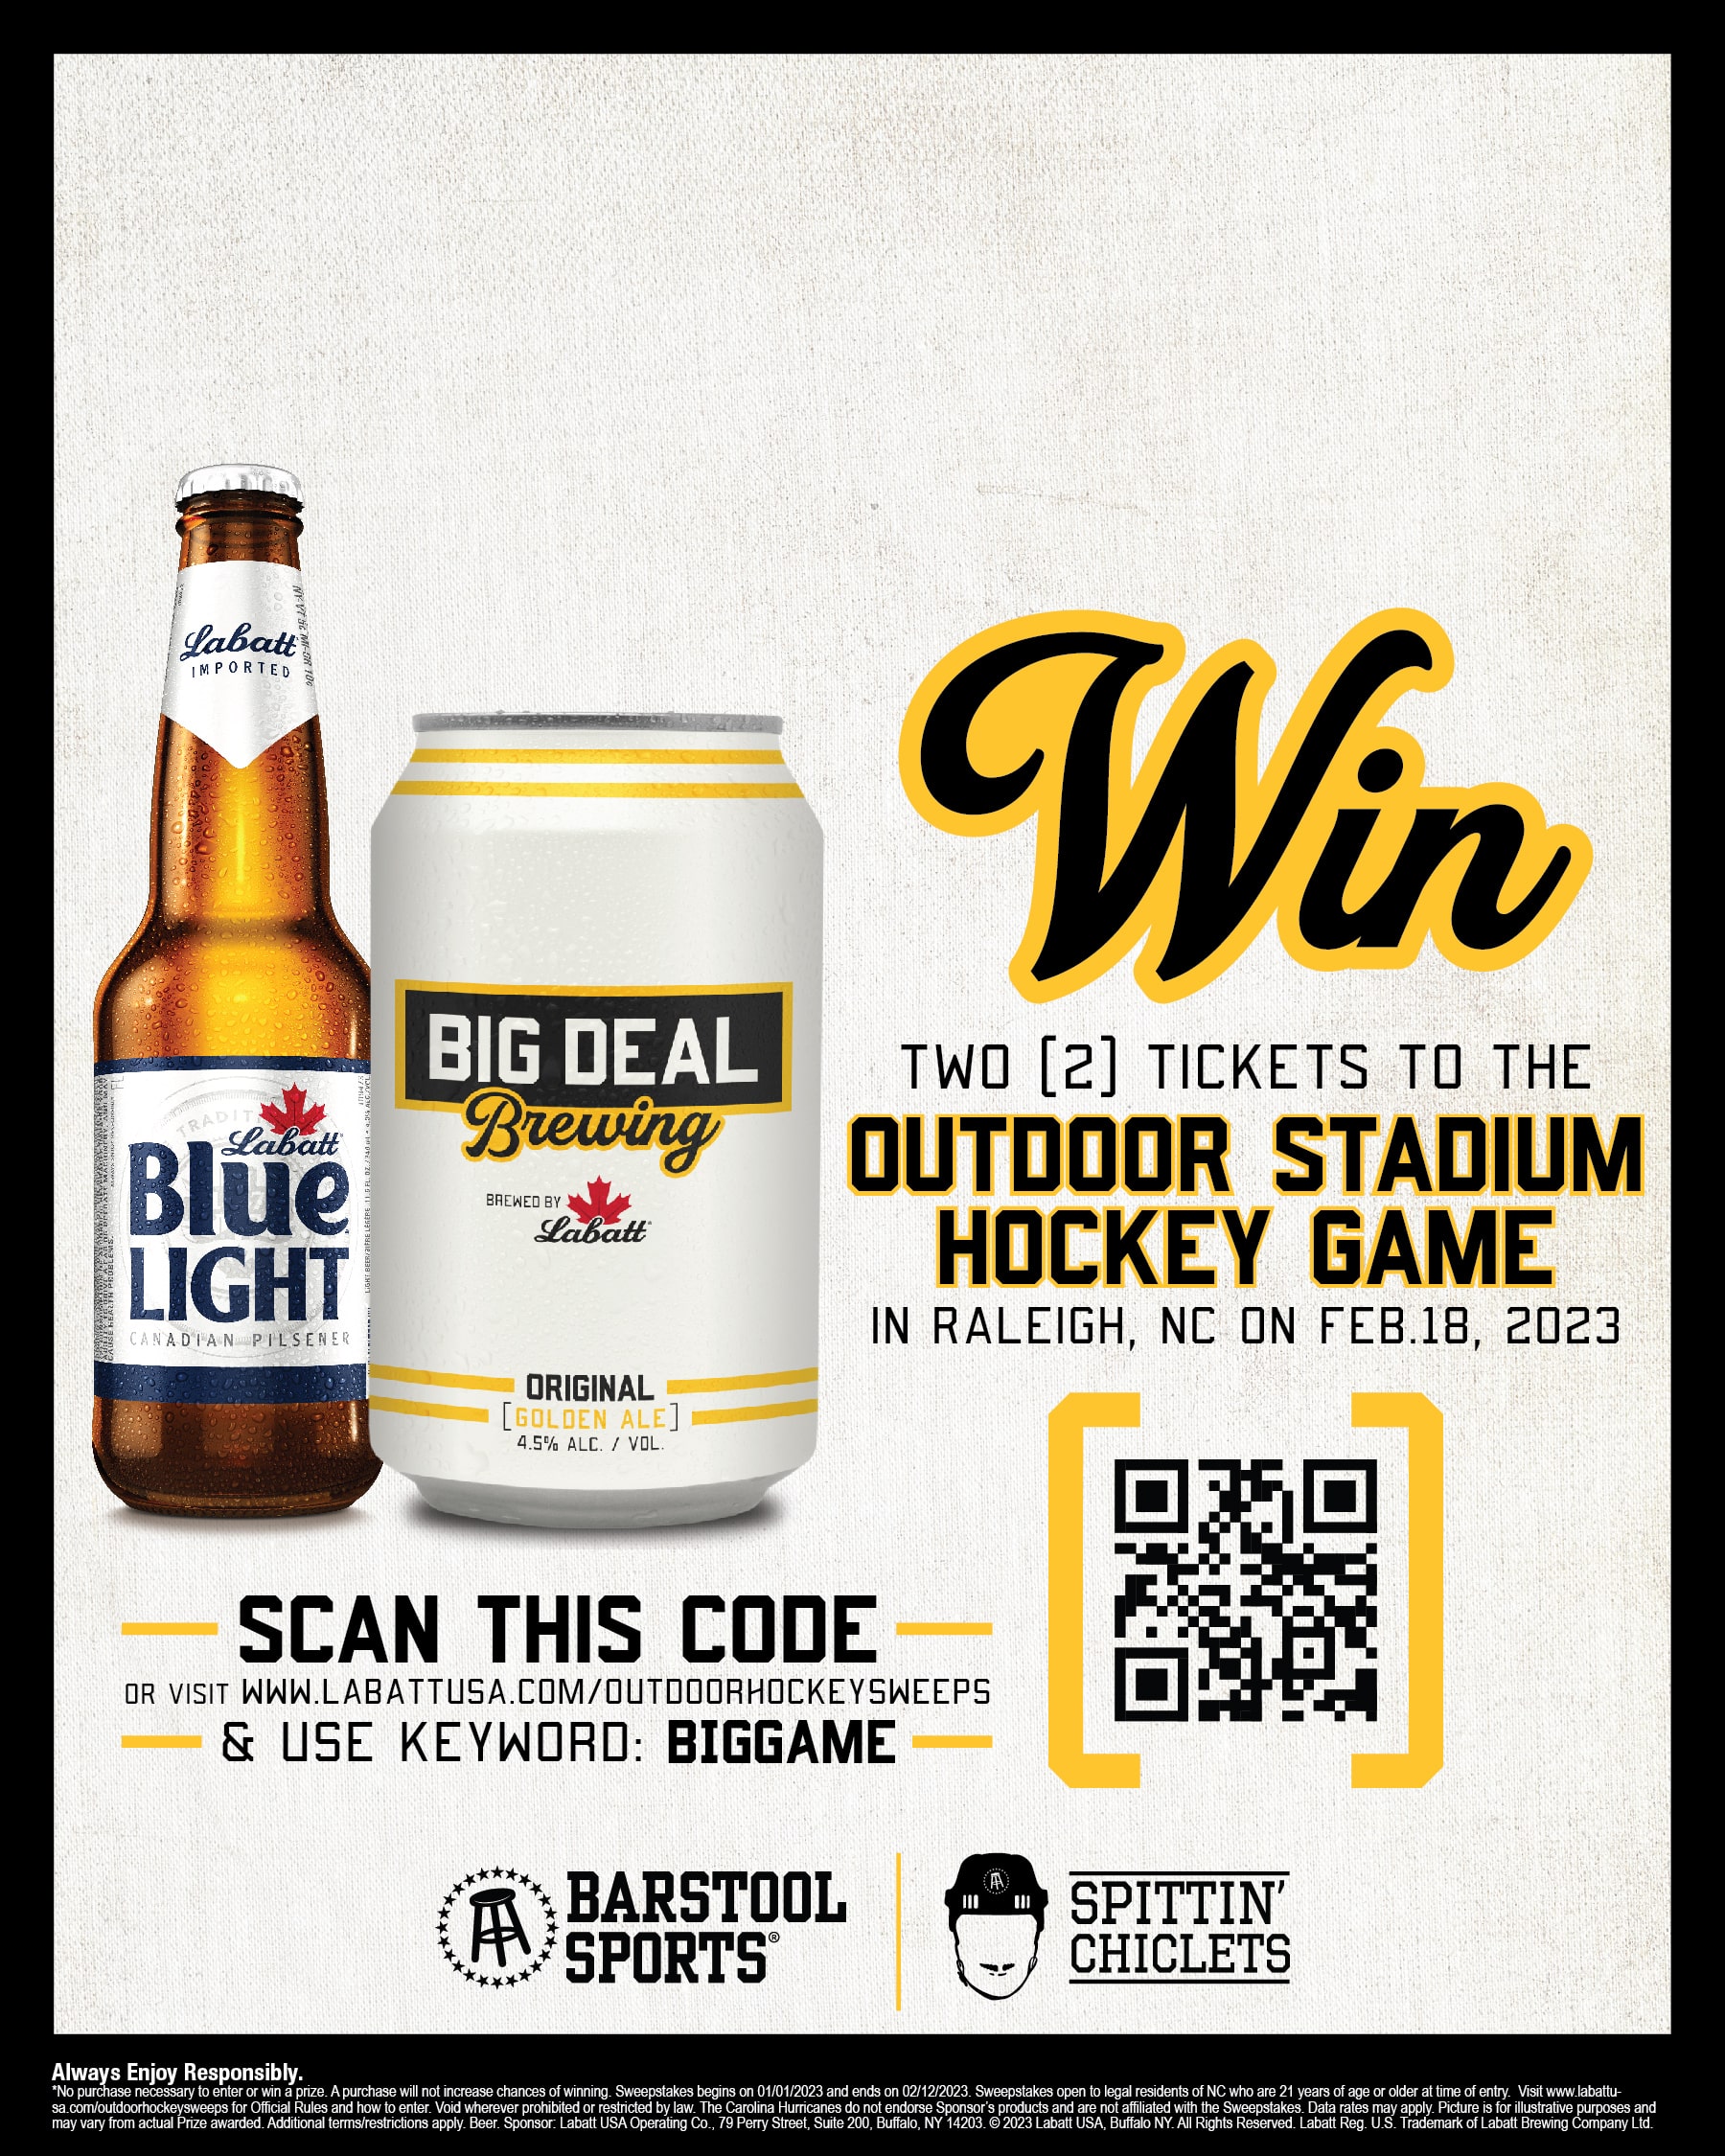 Enter for a chance to win two tickets to the outdoor stadium hockey game in Raleigh, NC on Feb.18, 2023!